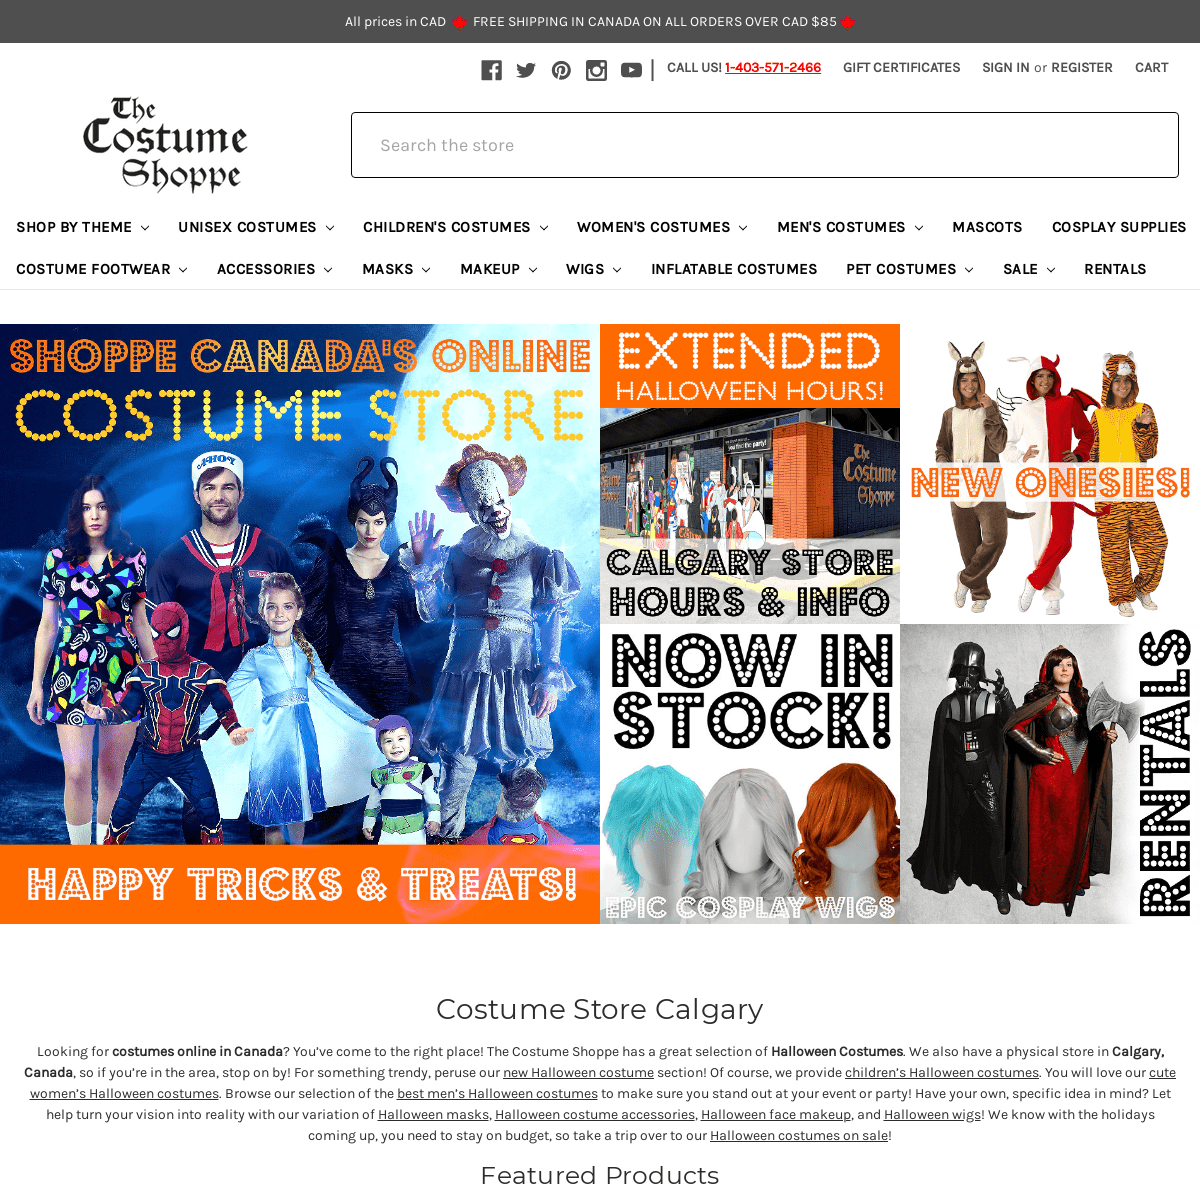 A complete backup of thecostumeshoppe.com